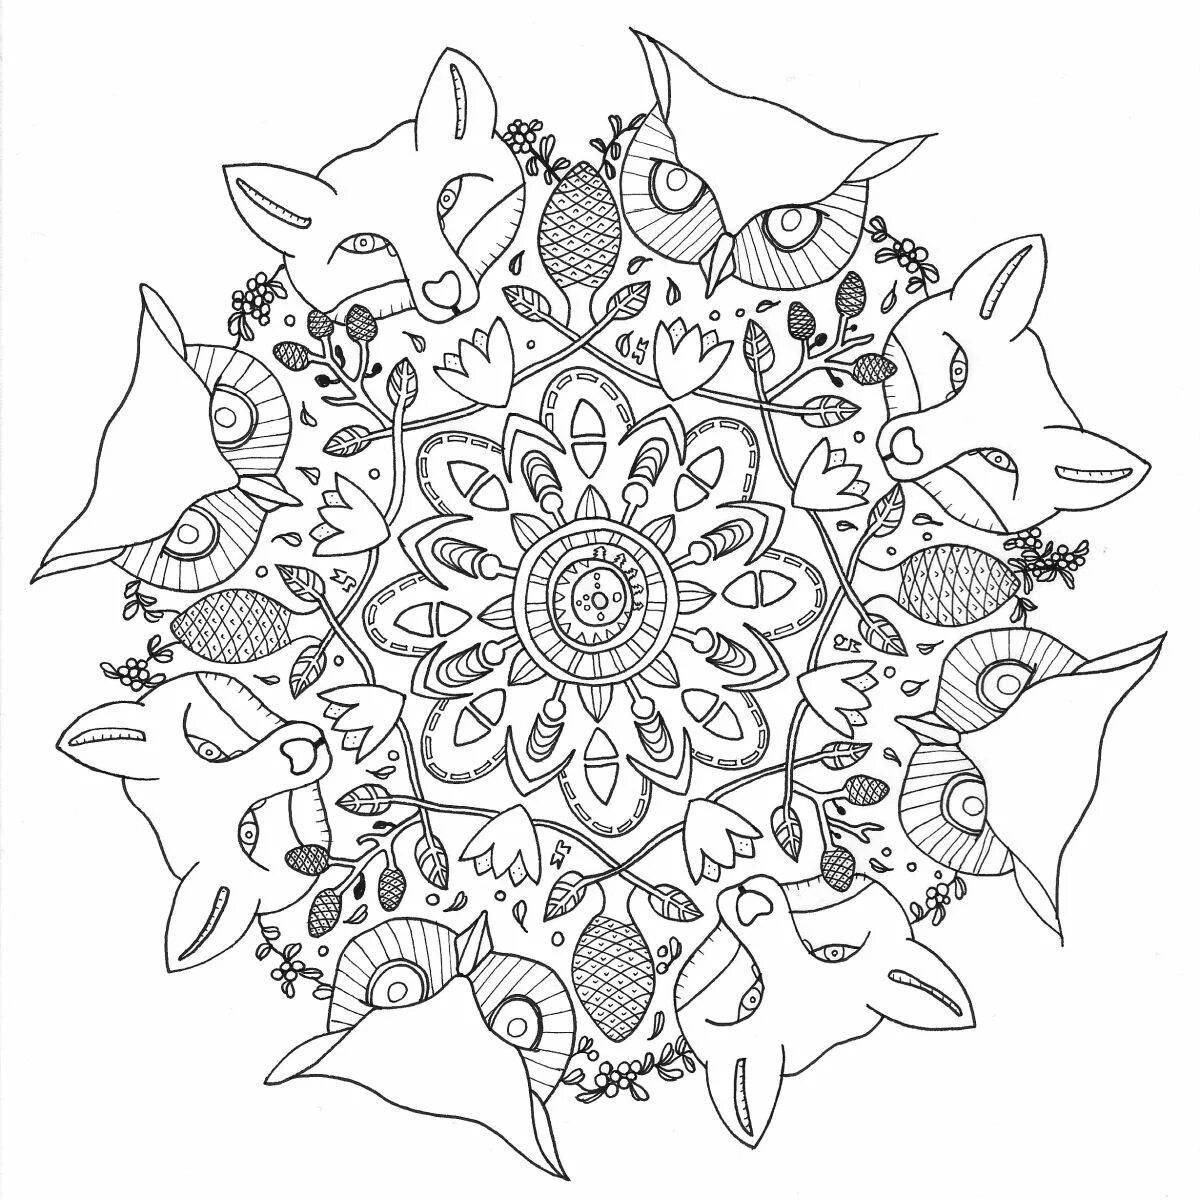 Soothing stress relief coloring book